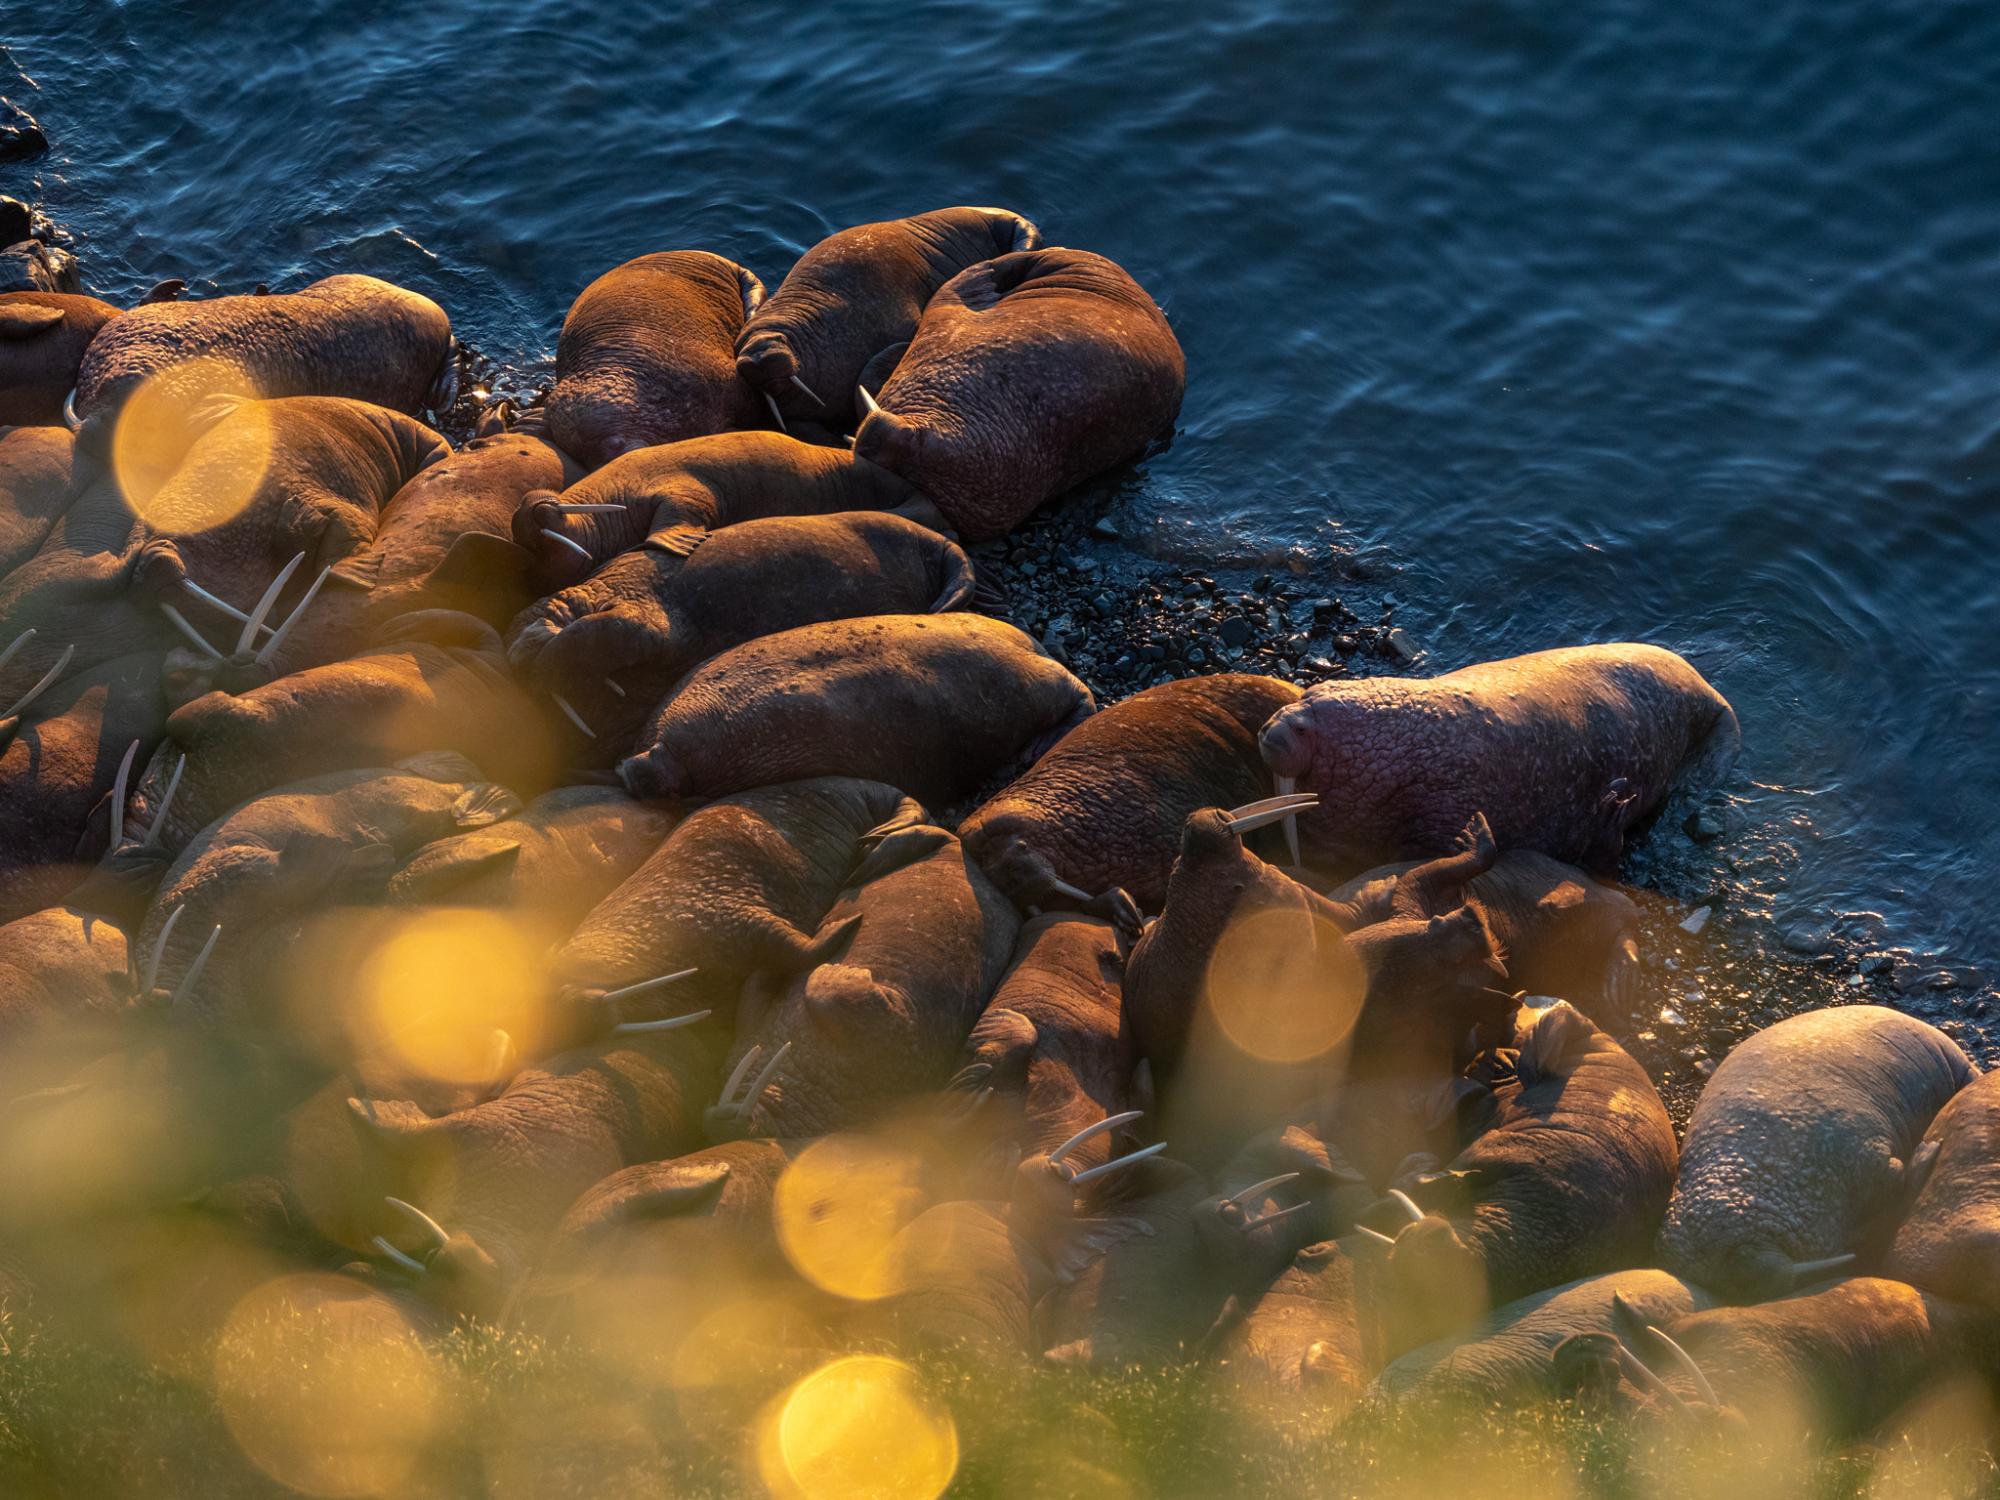 The sun rises over a group of Pacific walrus on Round Island. Walrus prefer to be in physical contact with other animals&mdash;even if that means frequently jostling, tusks and all, for the best spot on the beach.